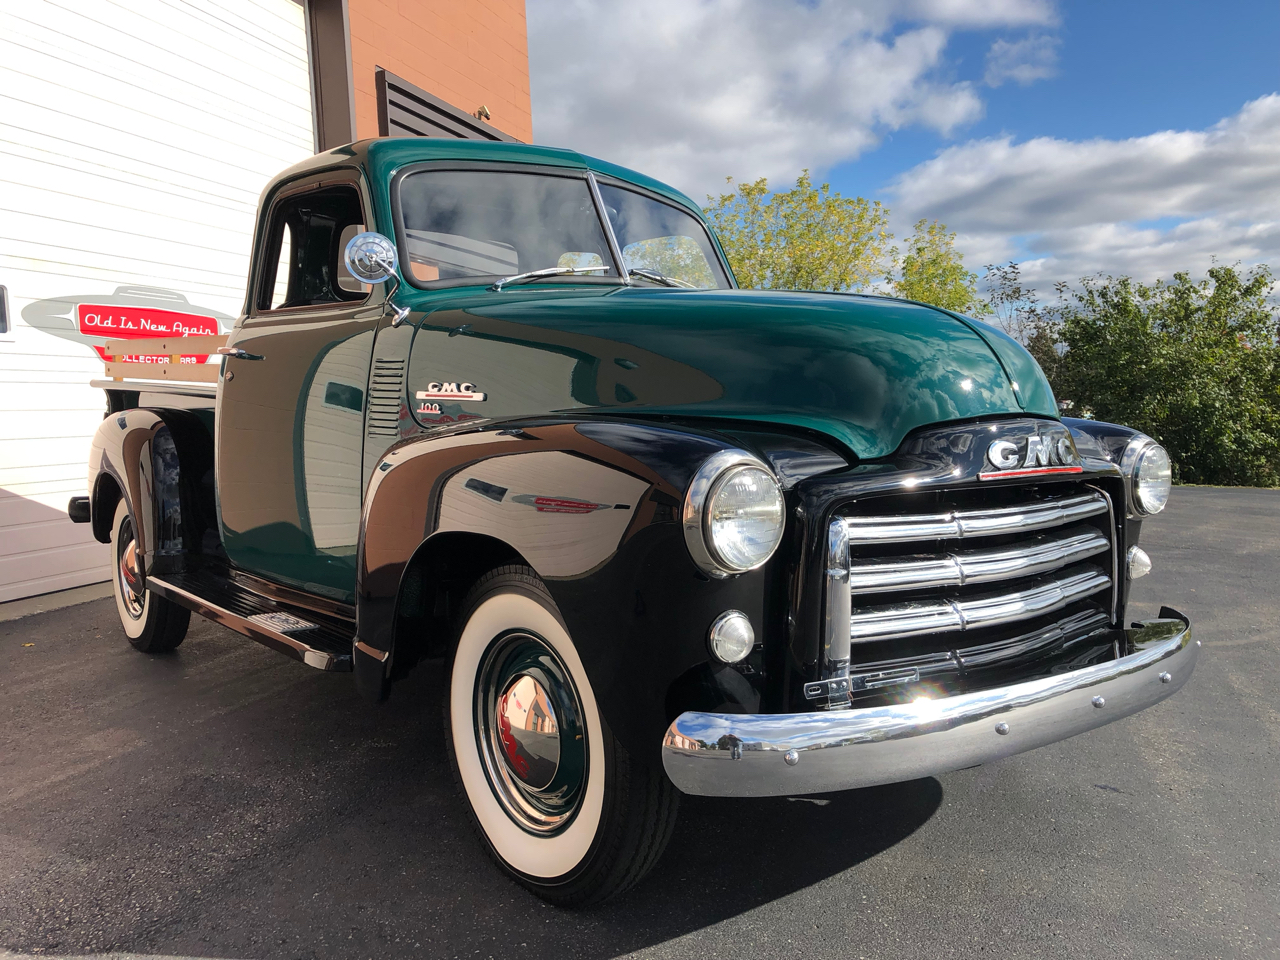 1950 GMC 100 5 Window Pick Up Truck | Old Is New Again Inc.